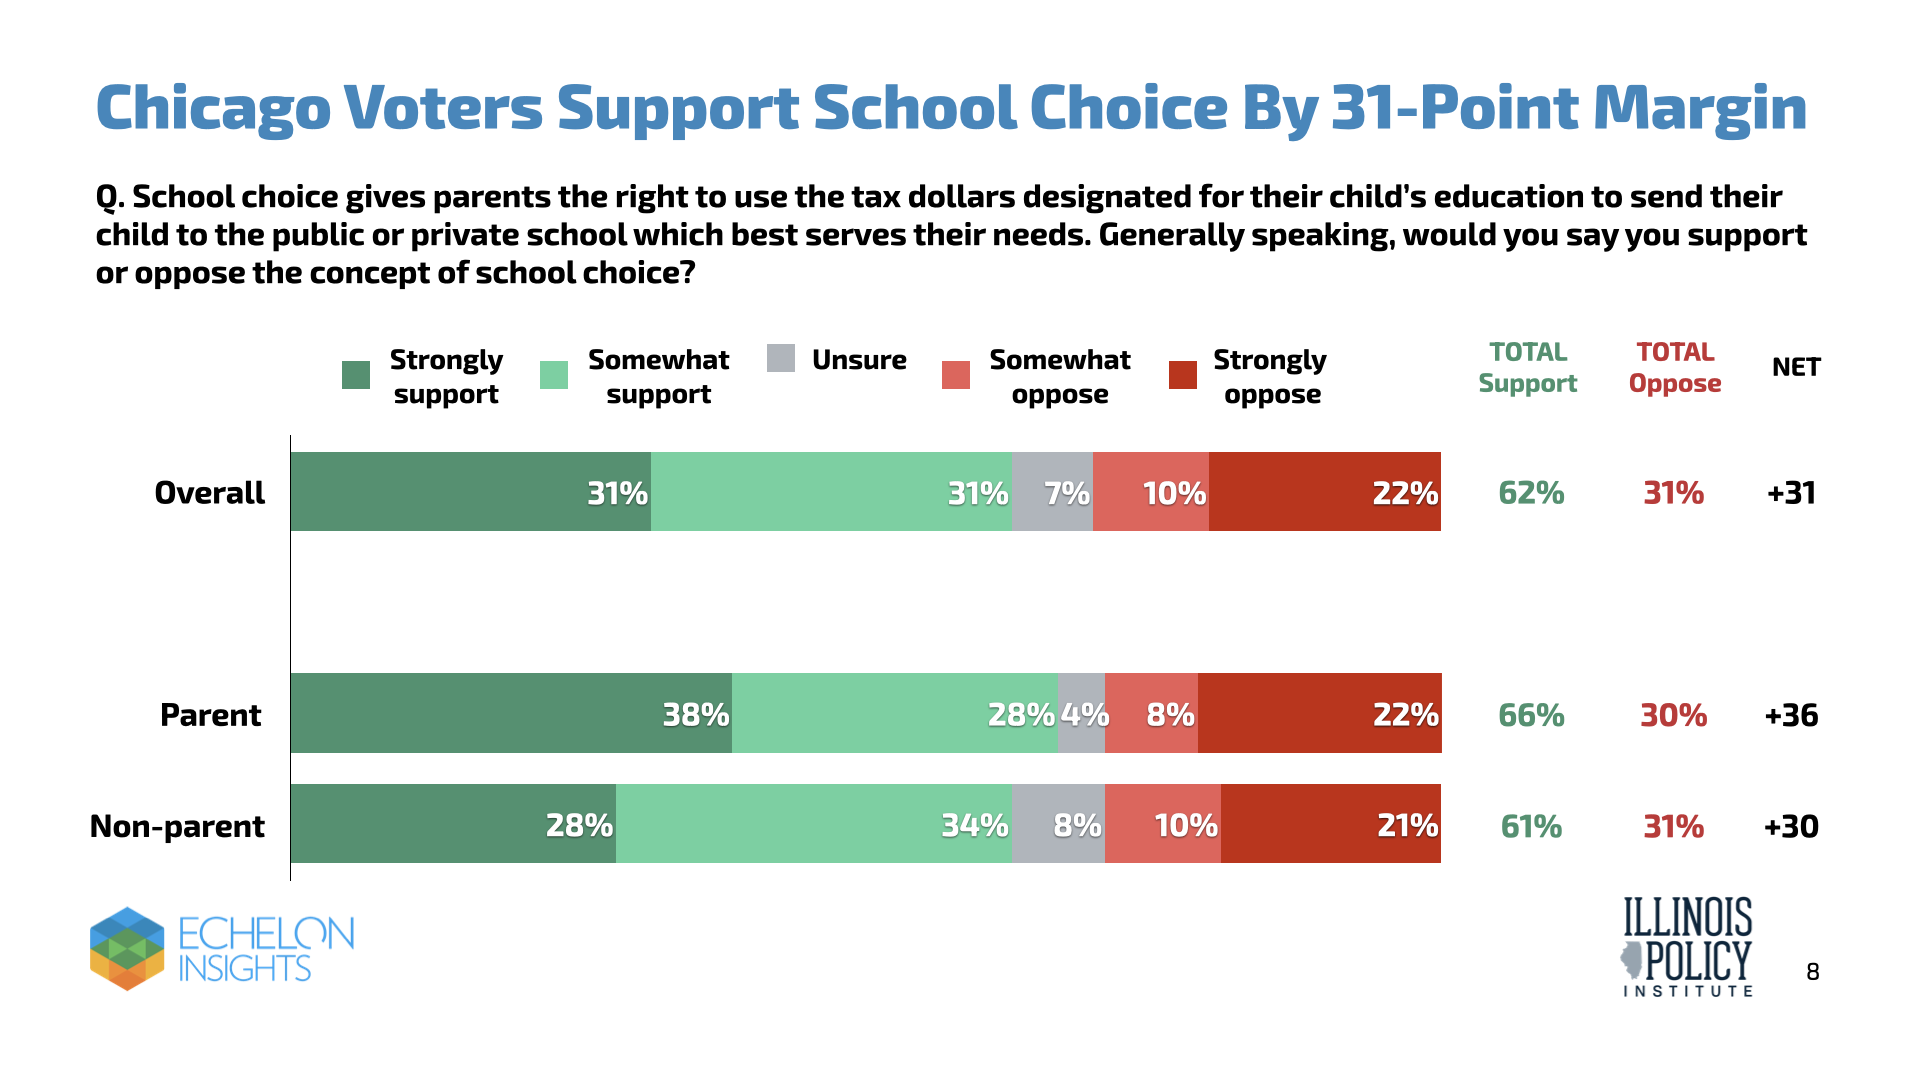 Chicago voters support school choice by a 31-point margin